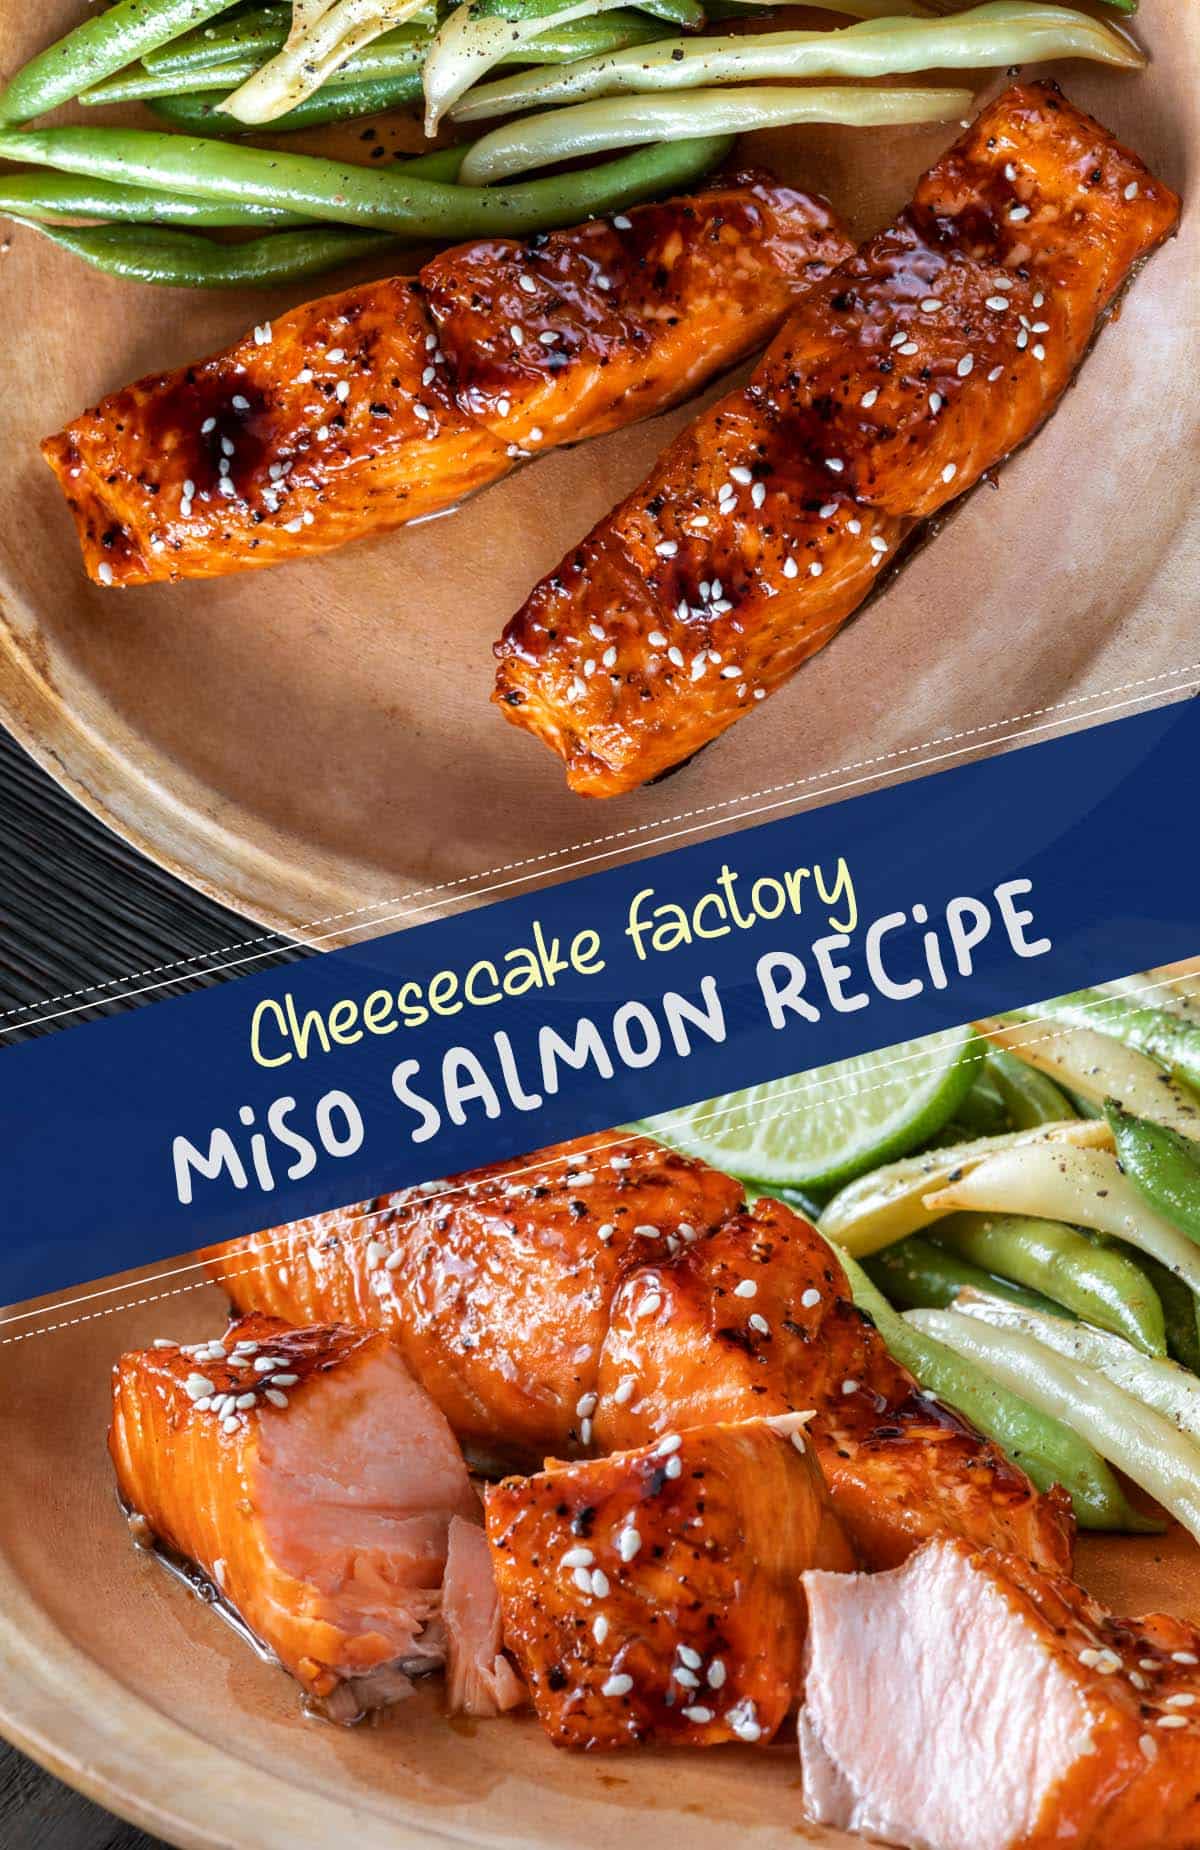 Savor the mouthwatering Cheesecake Factory Miso Salmon dish, featuring tender, perfectly grilled salmon with a delectable miso glaze.